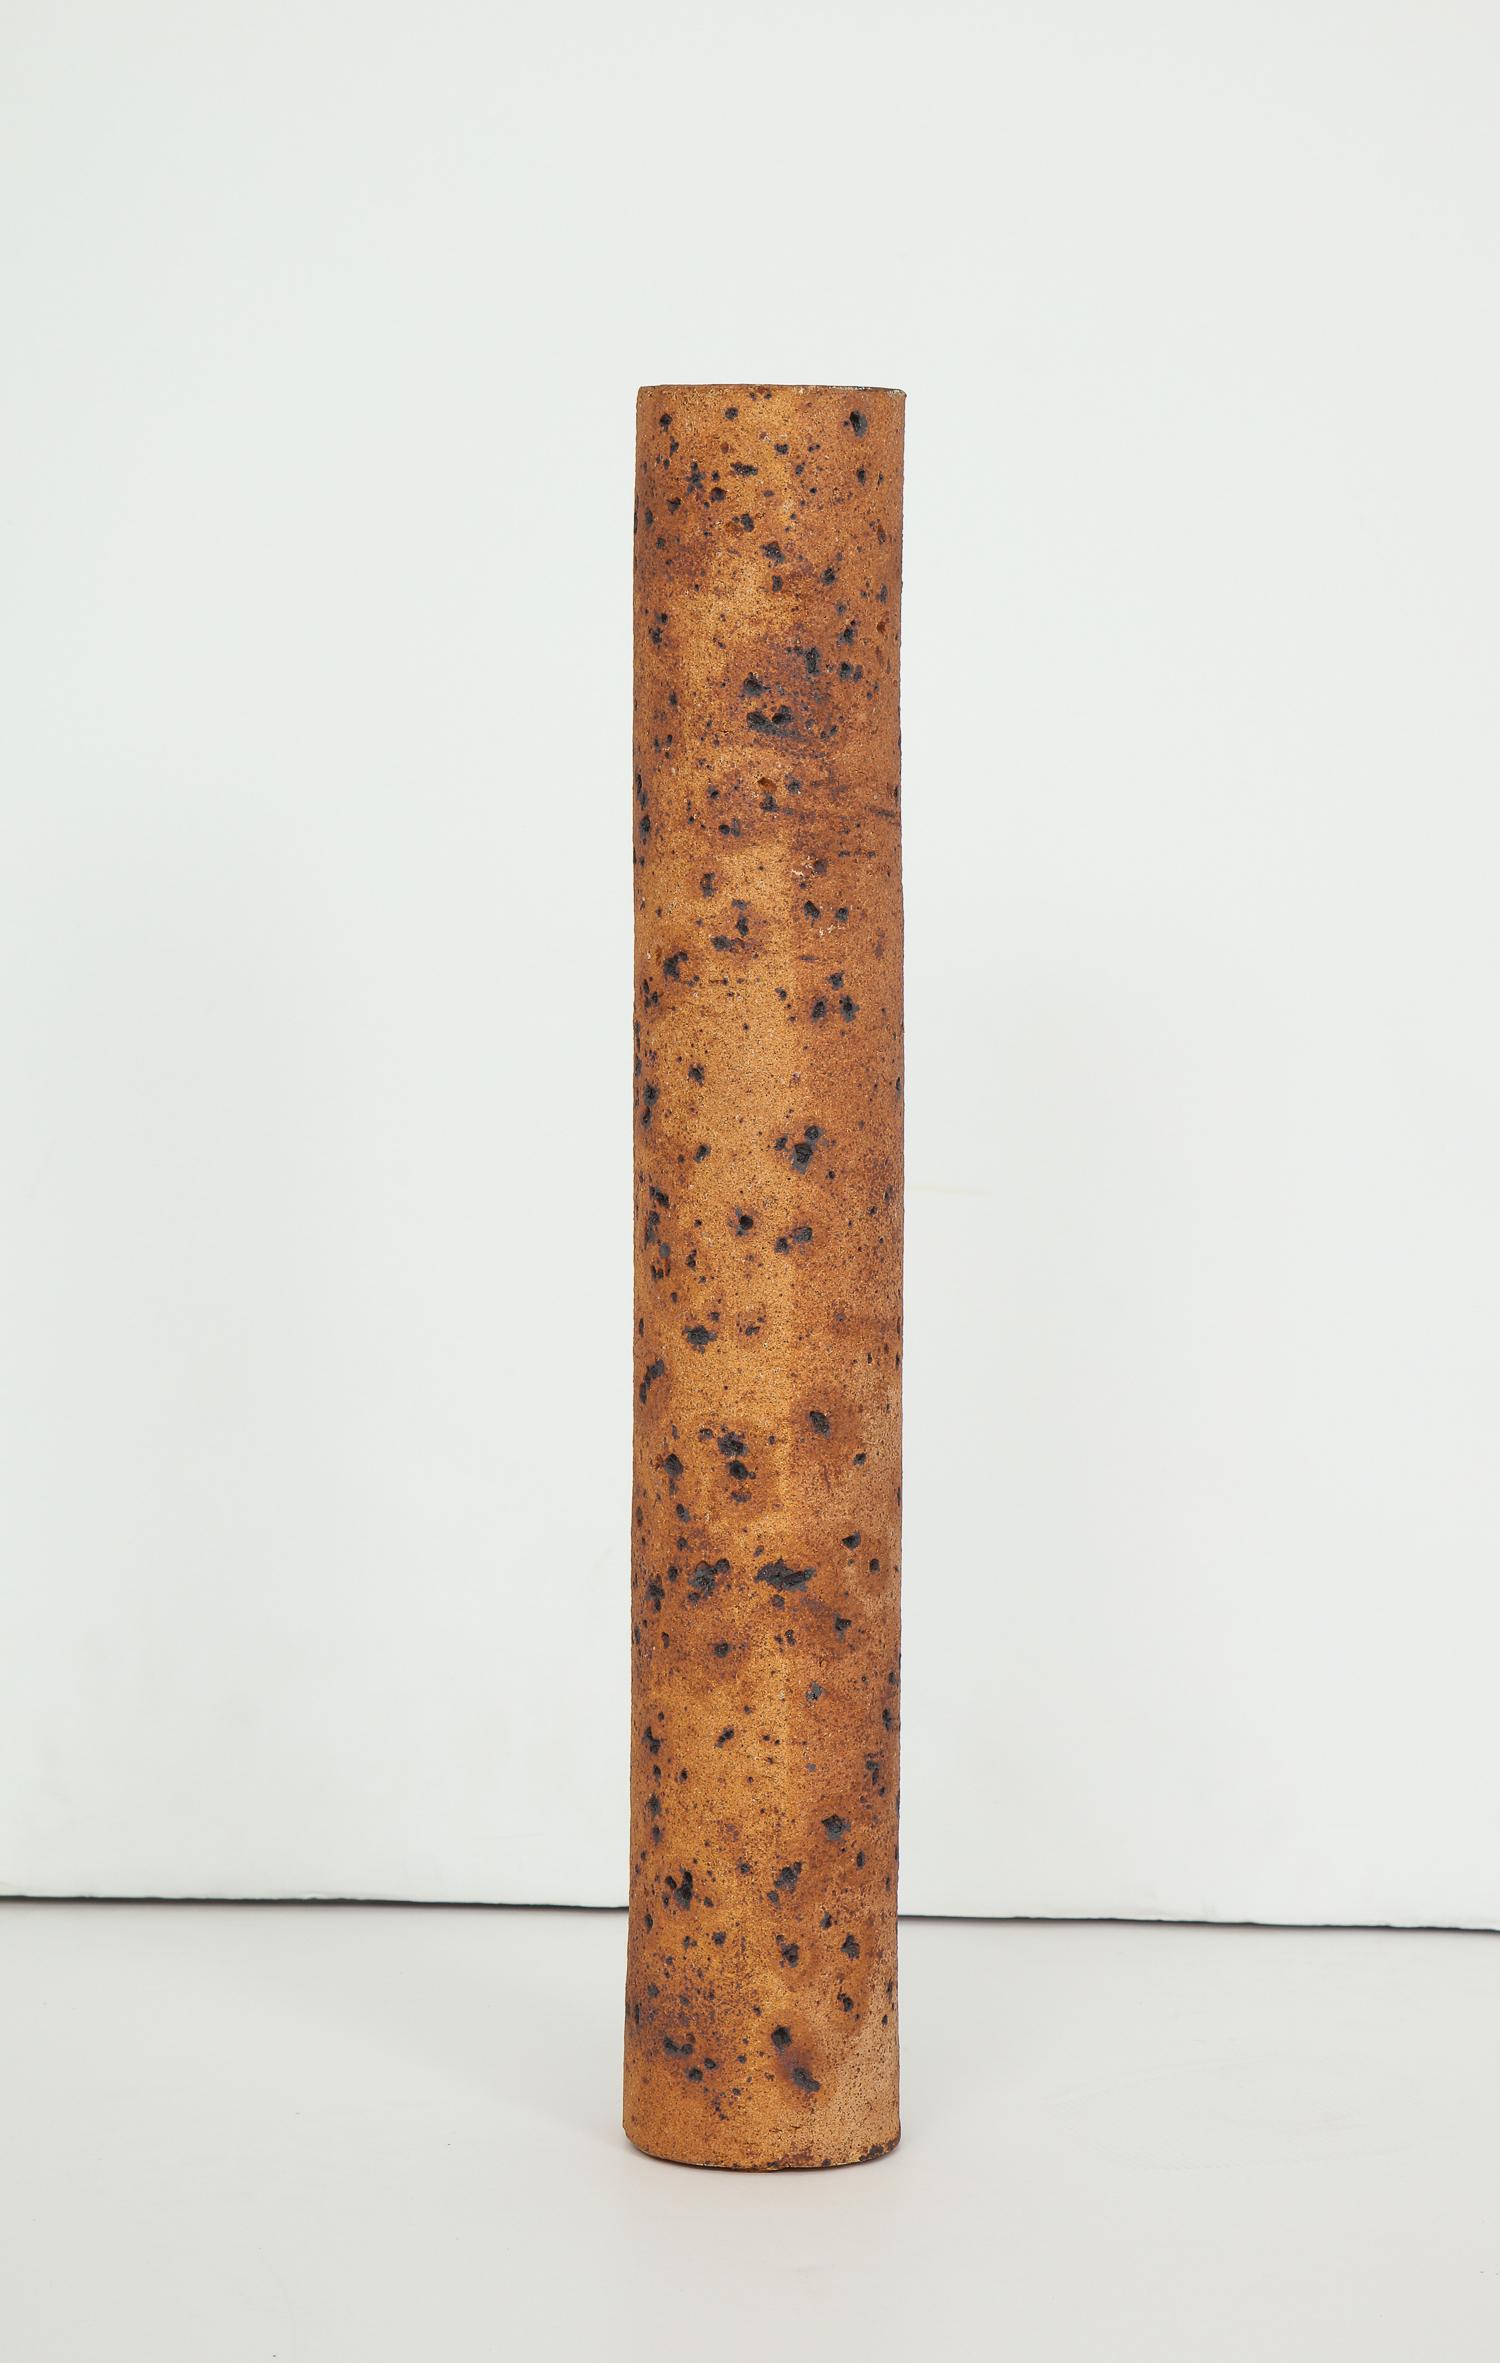 Tall and narrow quasi-natualistic cylindrical vessel with incised stippled patterning by Madrid ceramic artist Antonio Salvador Orodea, principal of the ASO factory. Part of a collection associated with the 1964-1965 Wold’s Fair in Flushing Meadows,